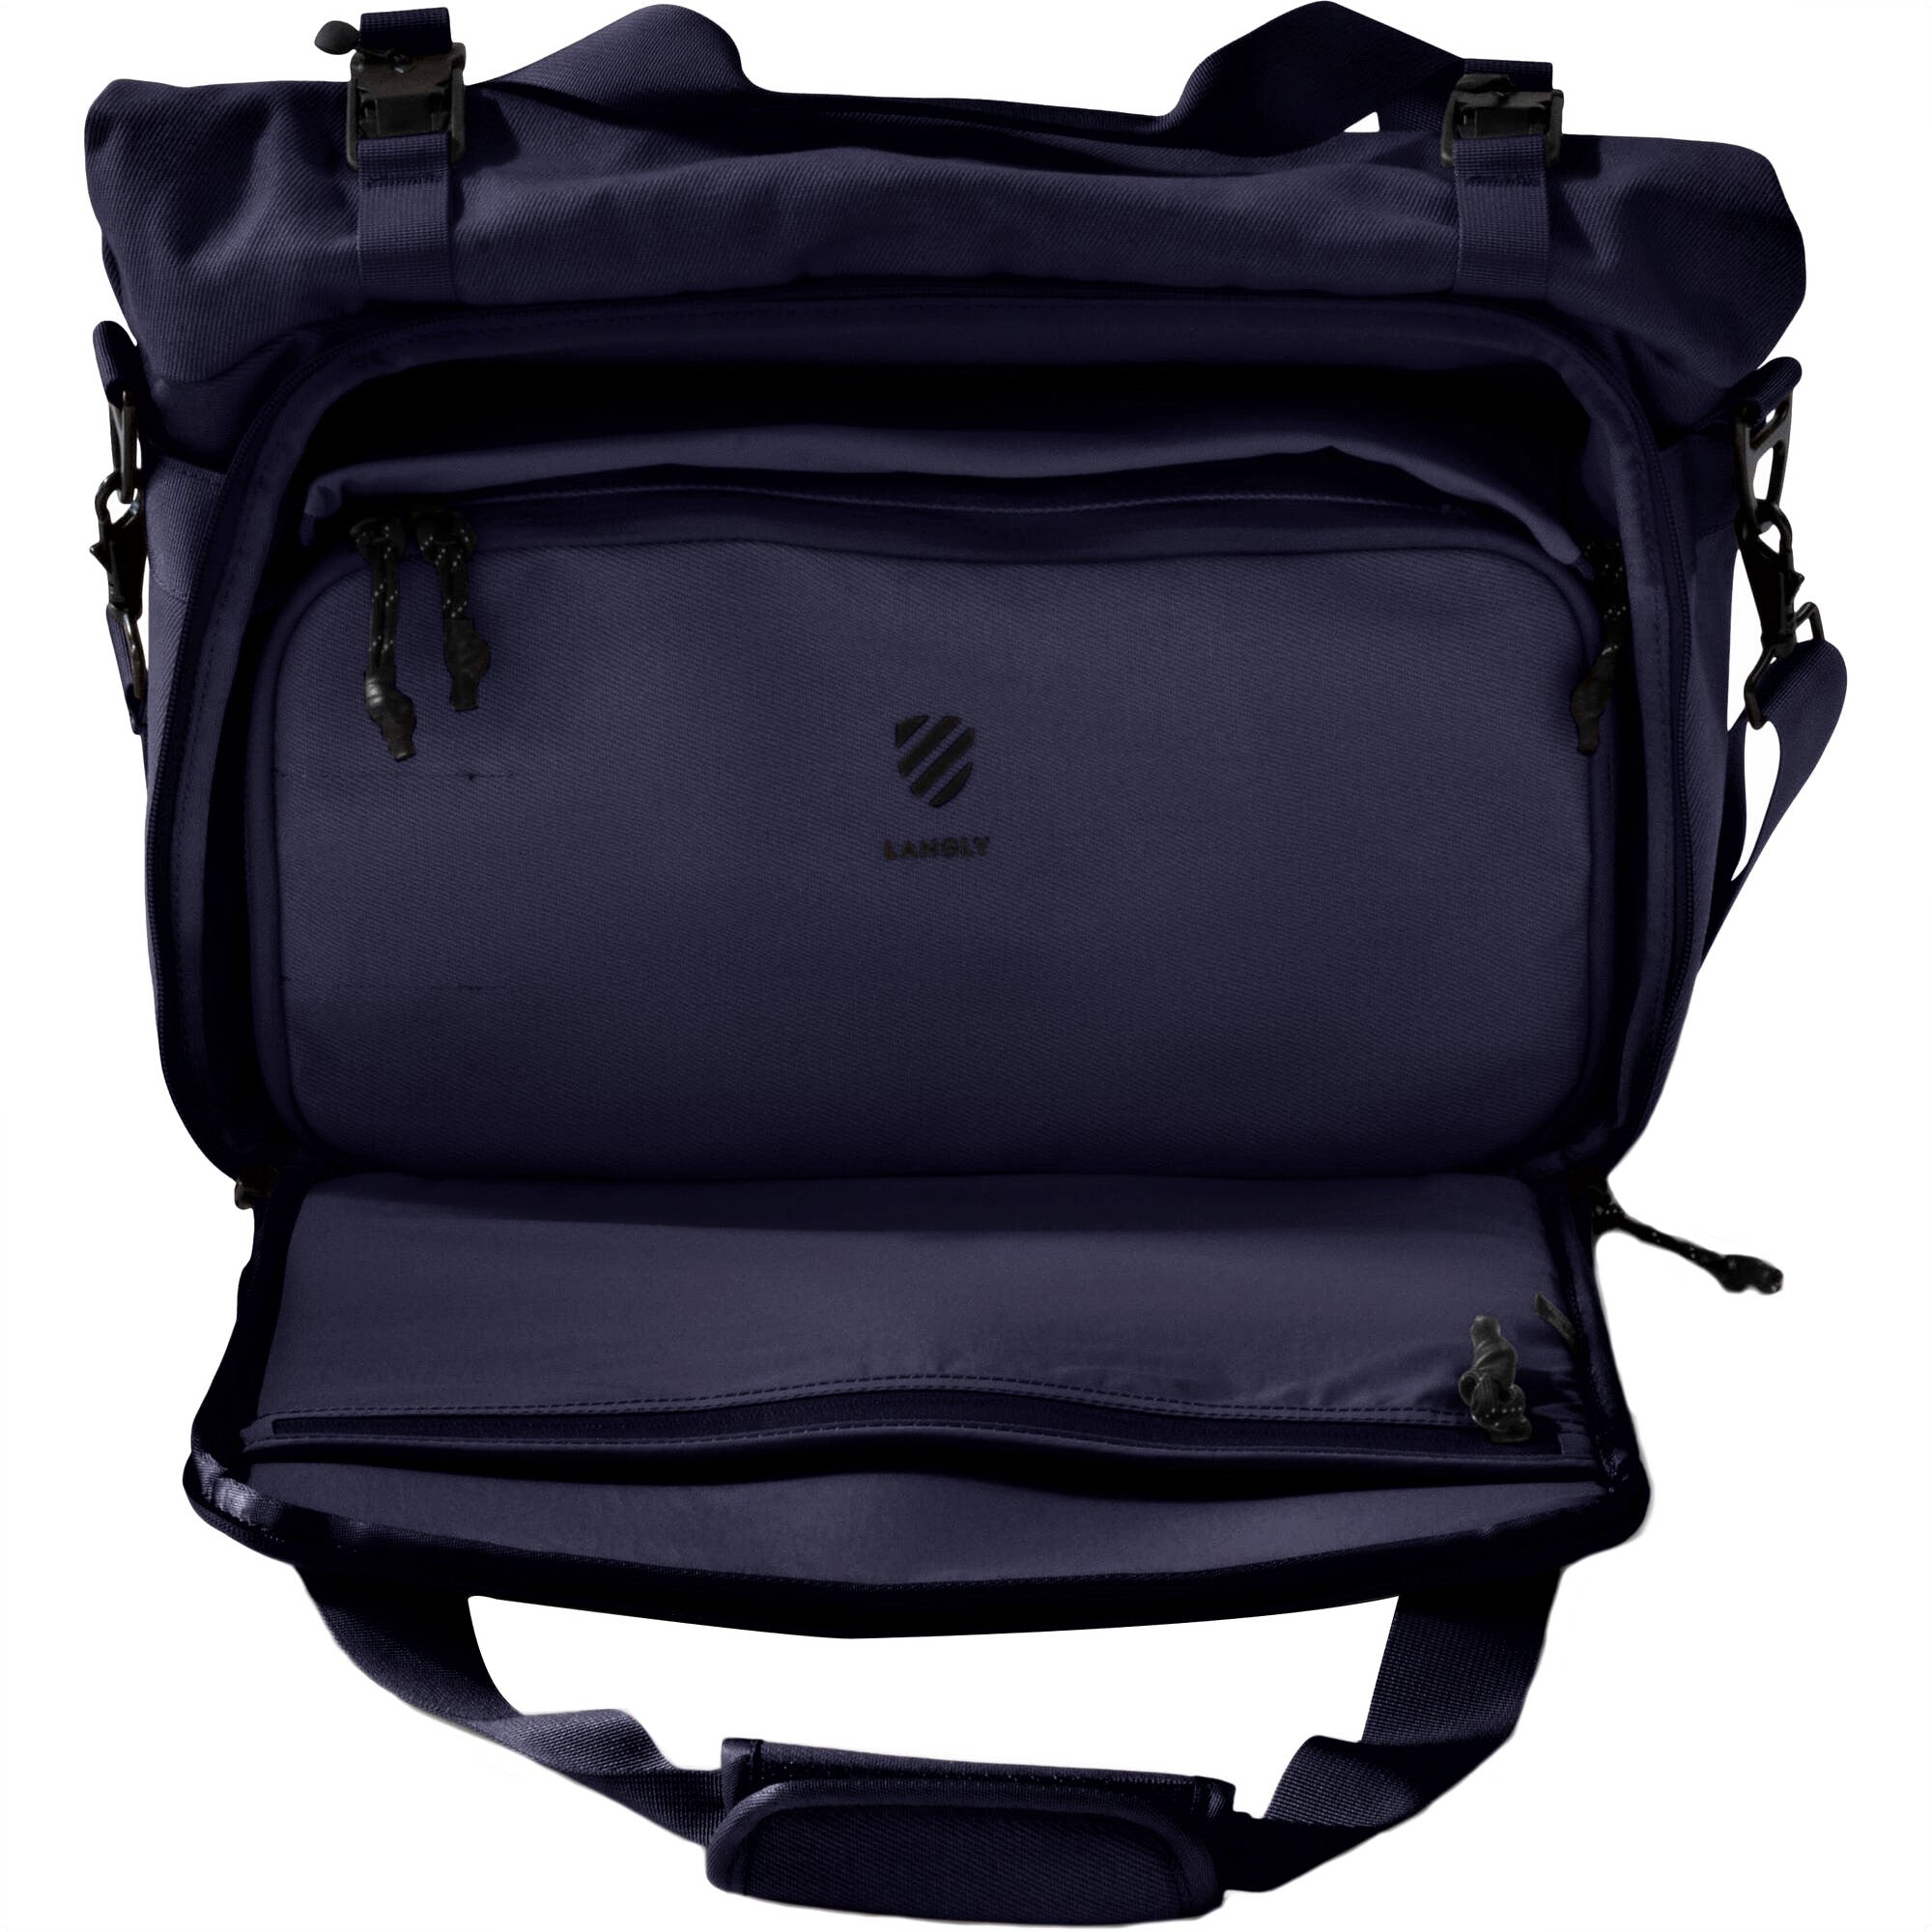 Langly Weekender Flight Bag with Camera Cube﻿ (Navy)